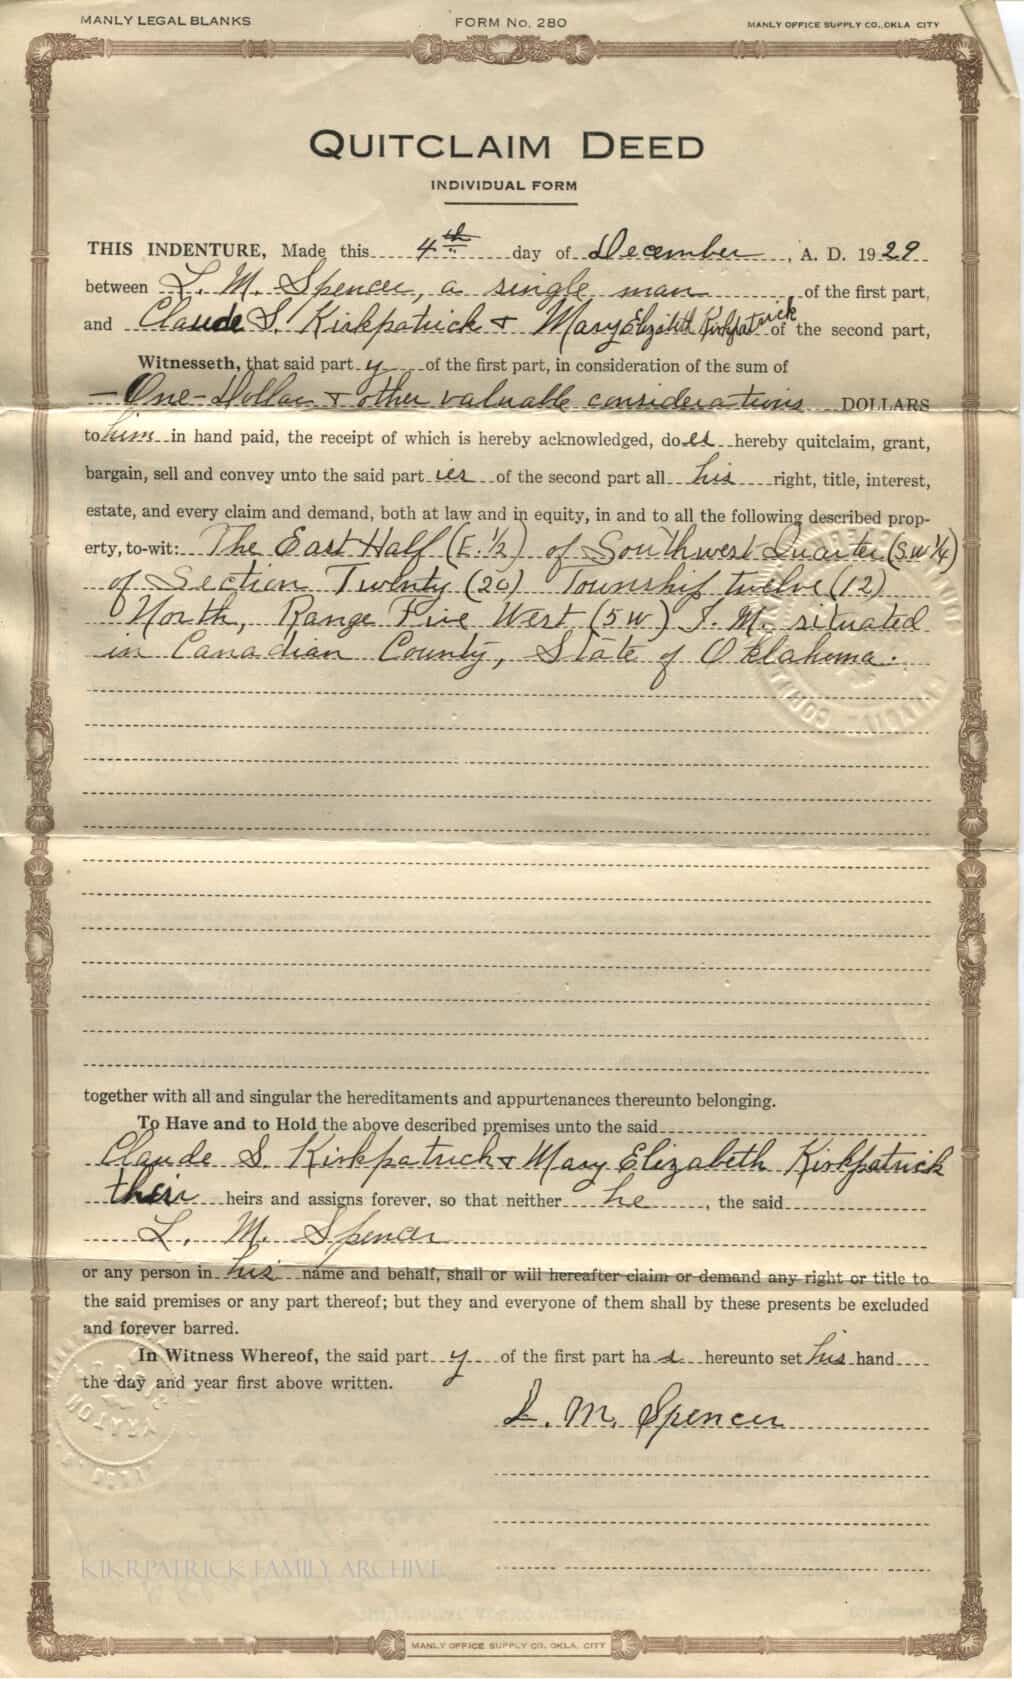 Quit Claim Deed between Lewis M. Spencer and Claude S. and Elizabeth Bole Kirkpatrick